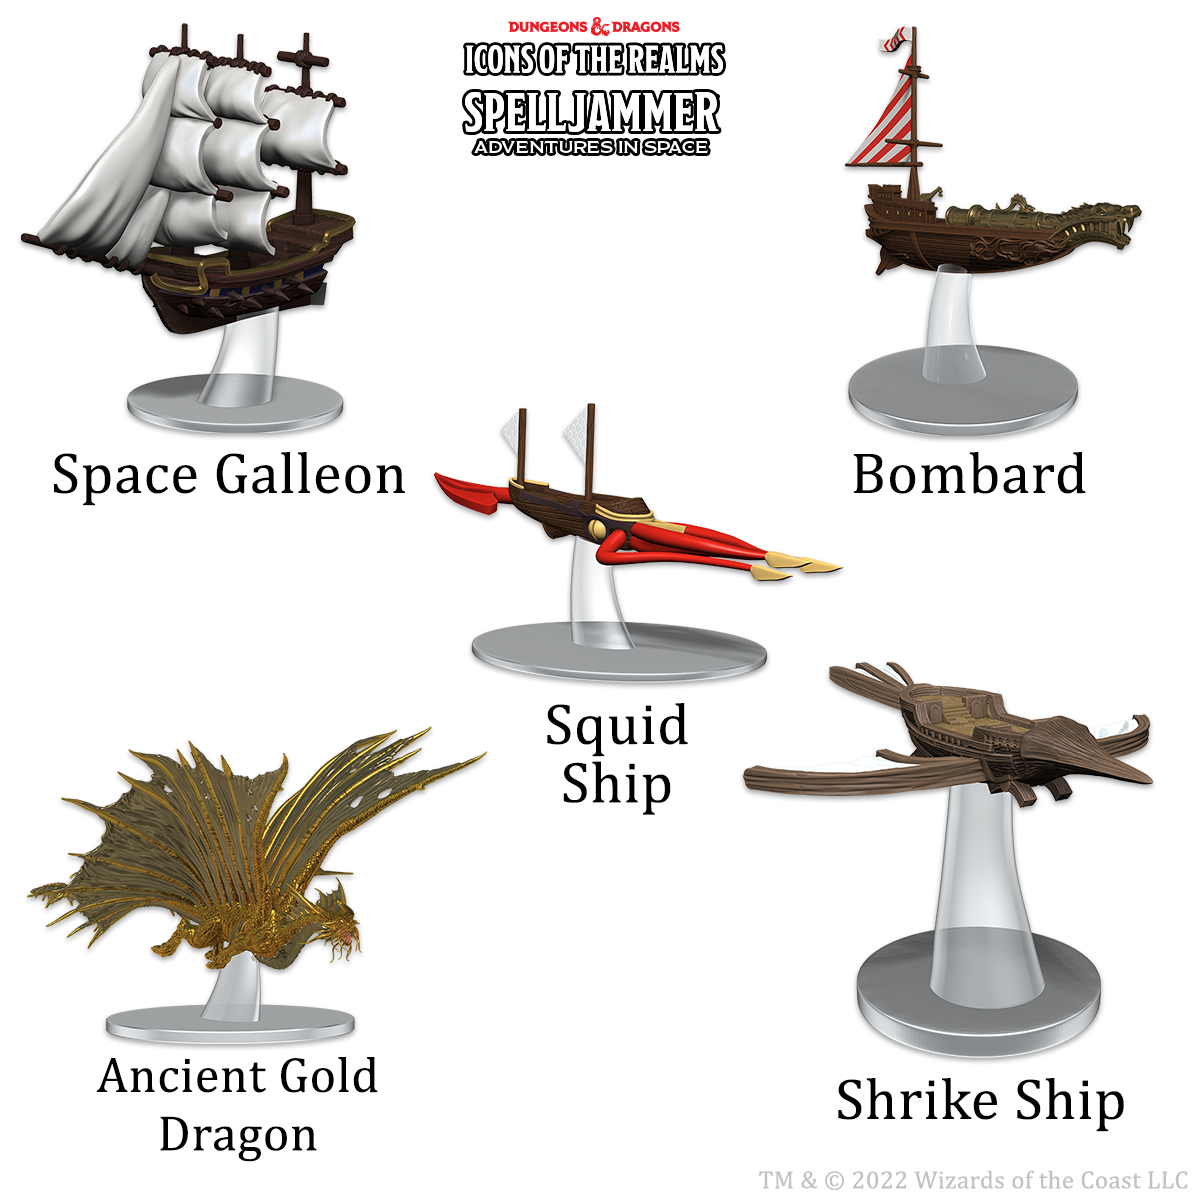 D&D Icons of the Realms: Spelljammer Adventures in Space: Welcome To Wildspace Ship Scale  